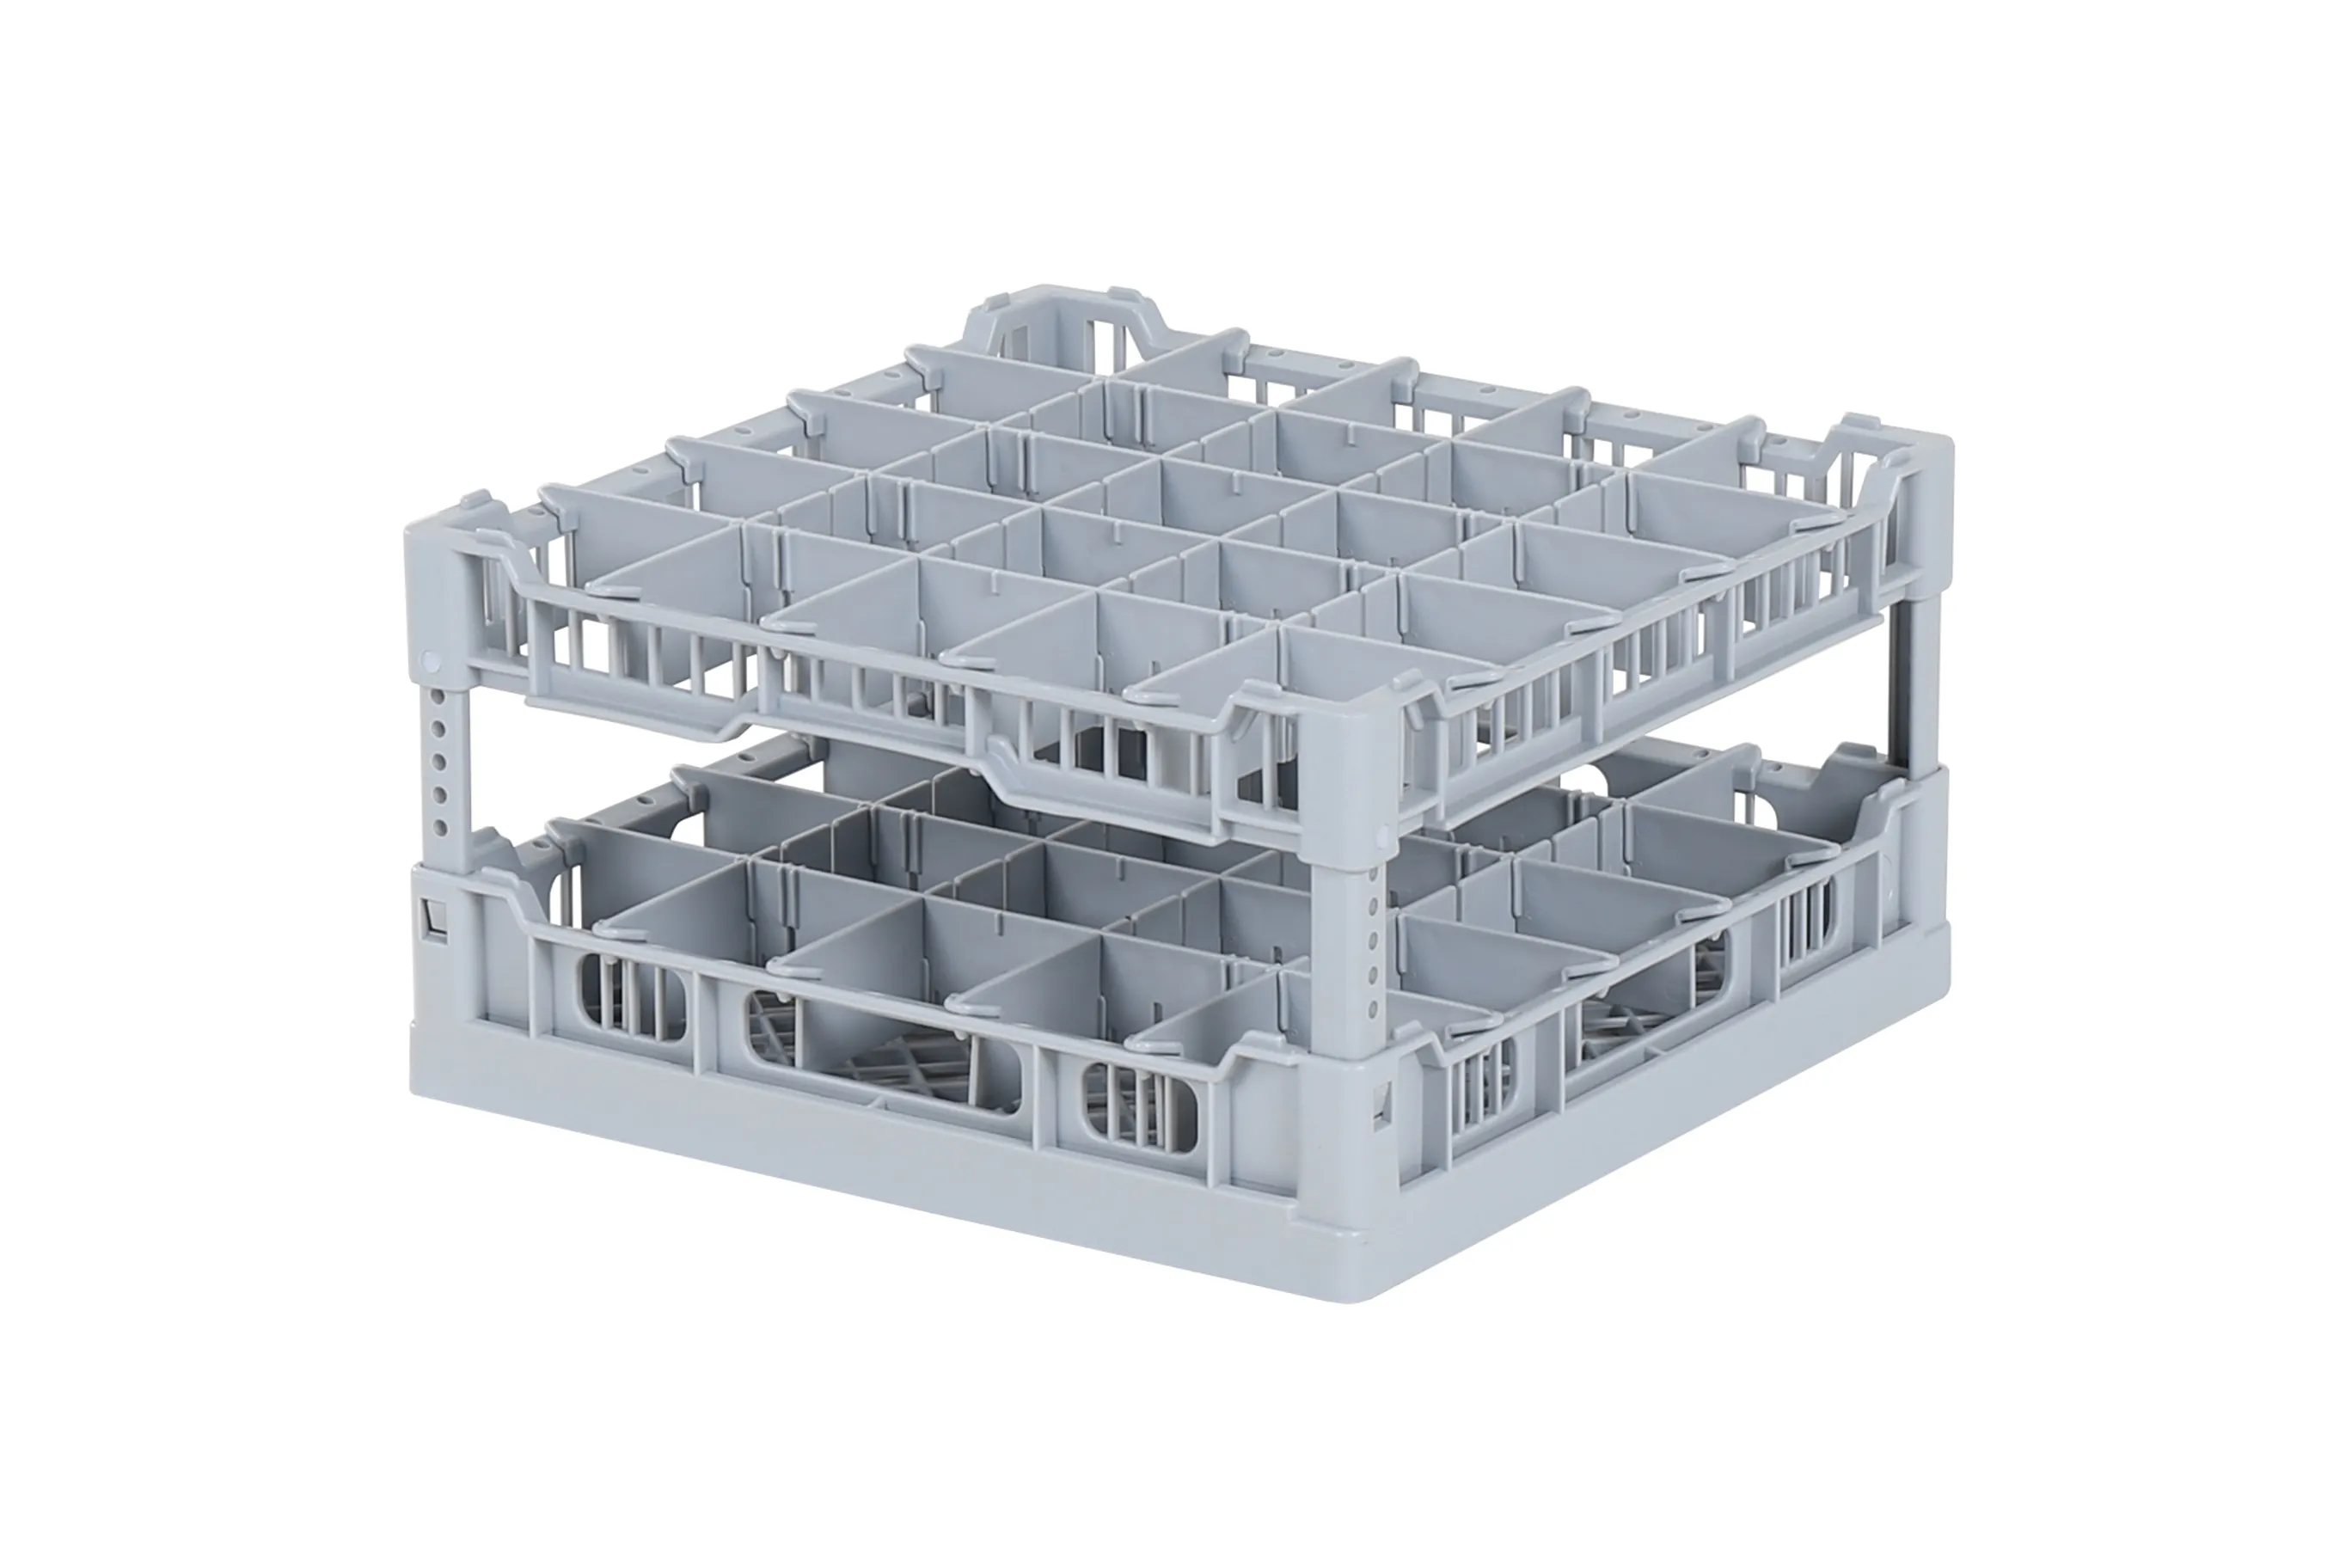 Dishwasher basket 400 x 400 mm - for glass heights from 66 to 190 mm - with 5 x 5 compartmentalization - maximum glass diameter 68mm